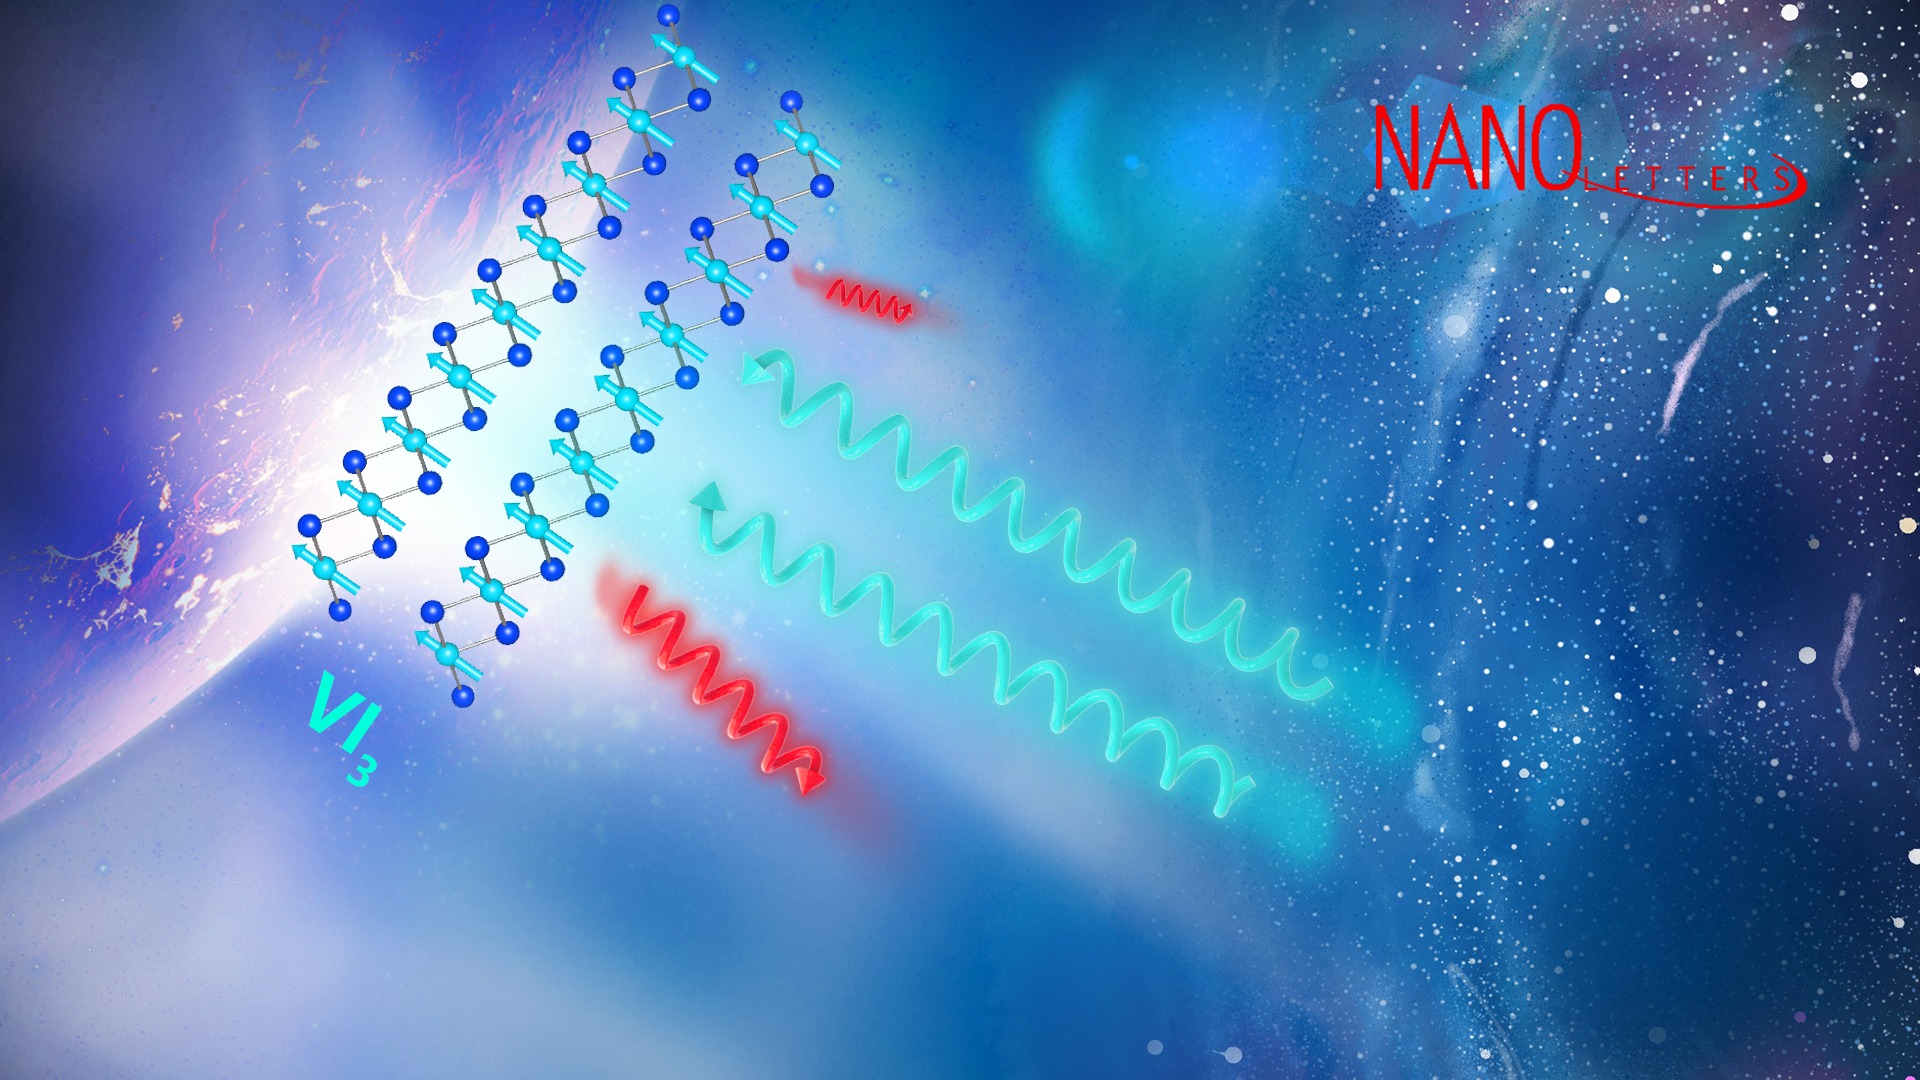 Magneto-optical Raman effect provides new insights into 2D magnets